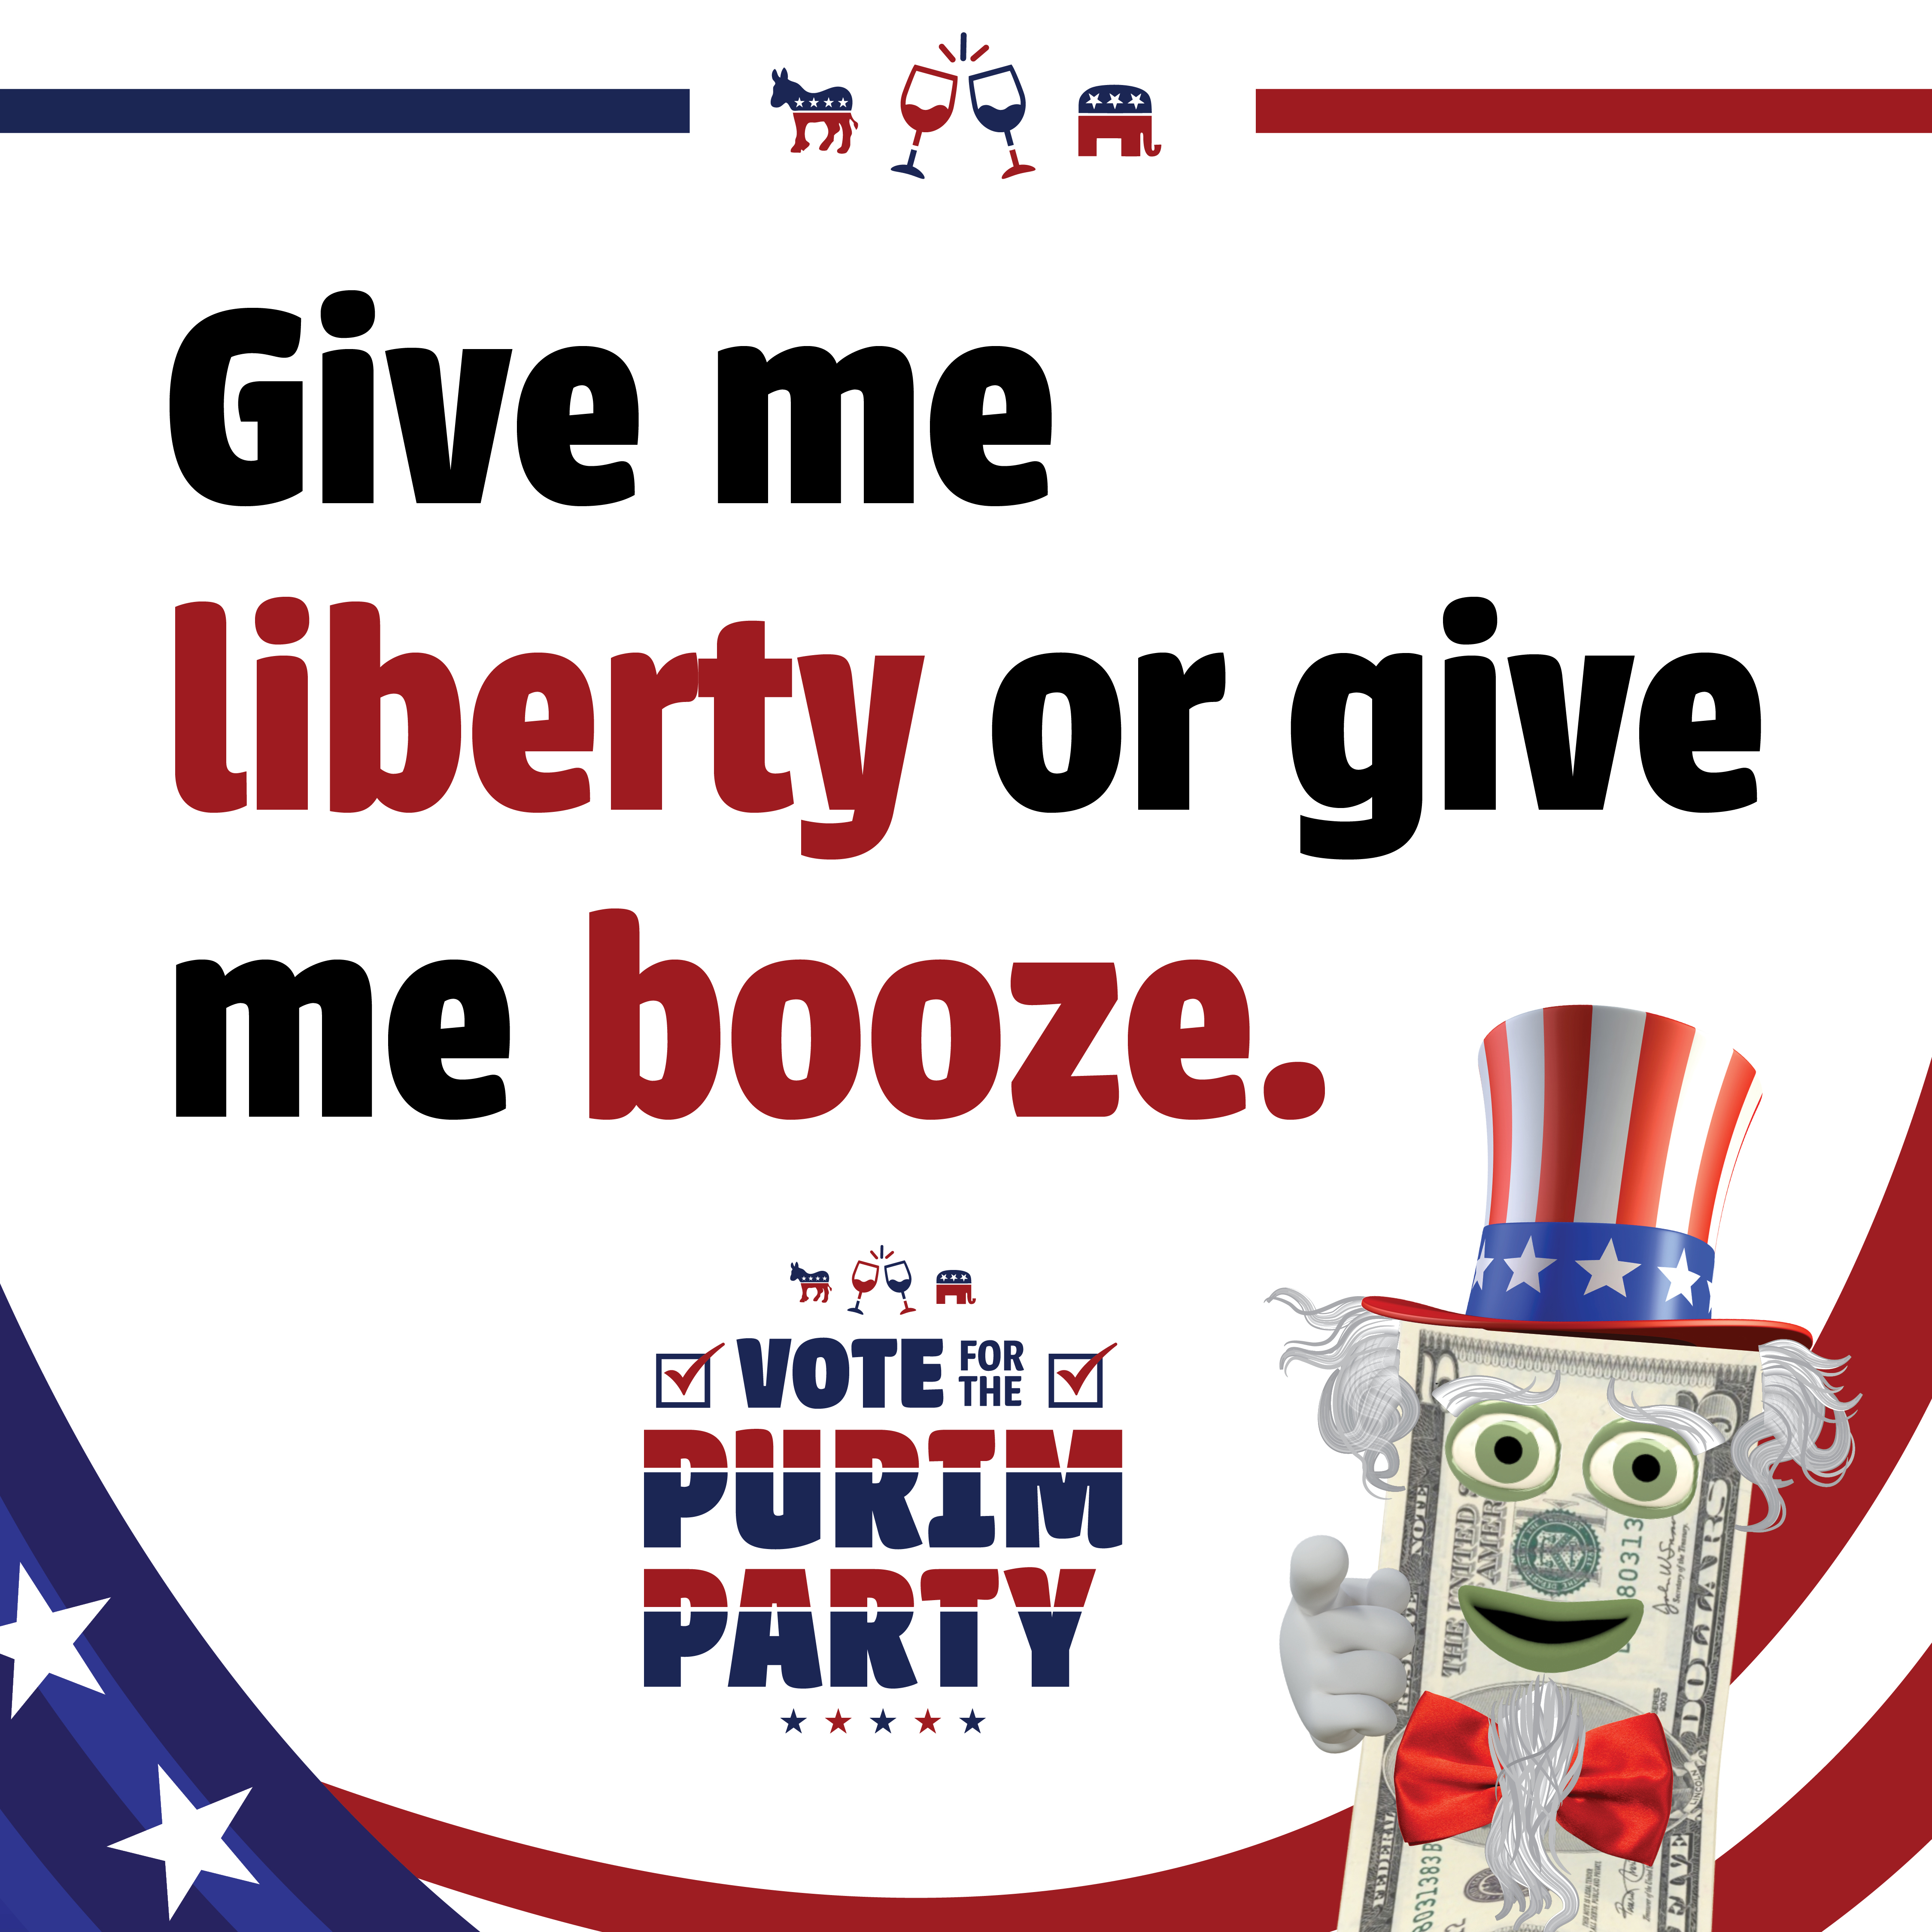 Give me liberty or give me booze.